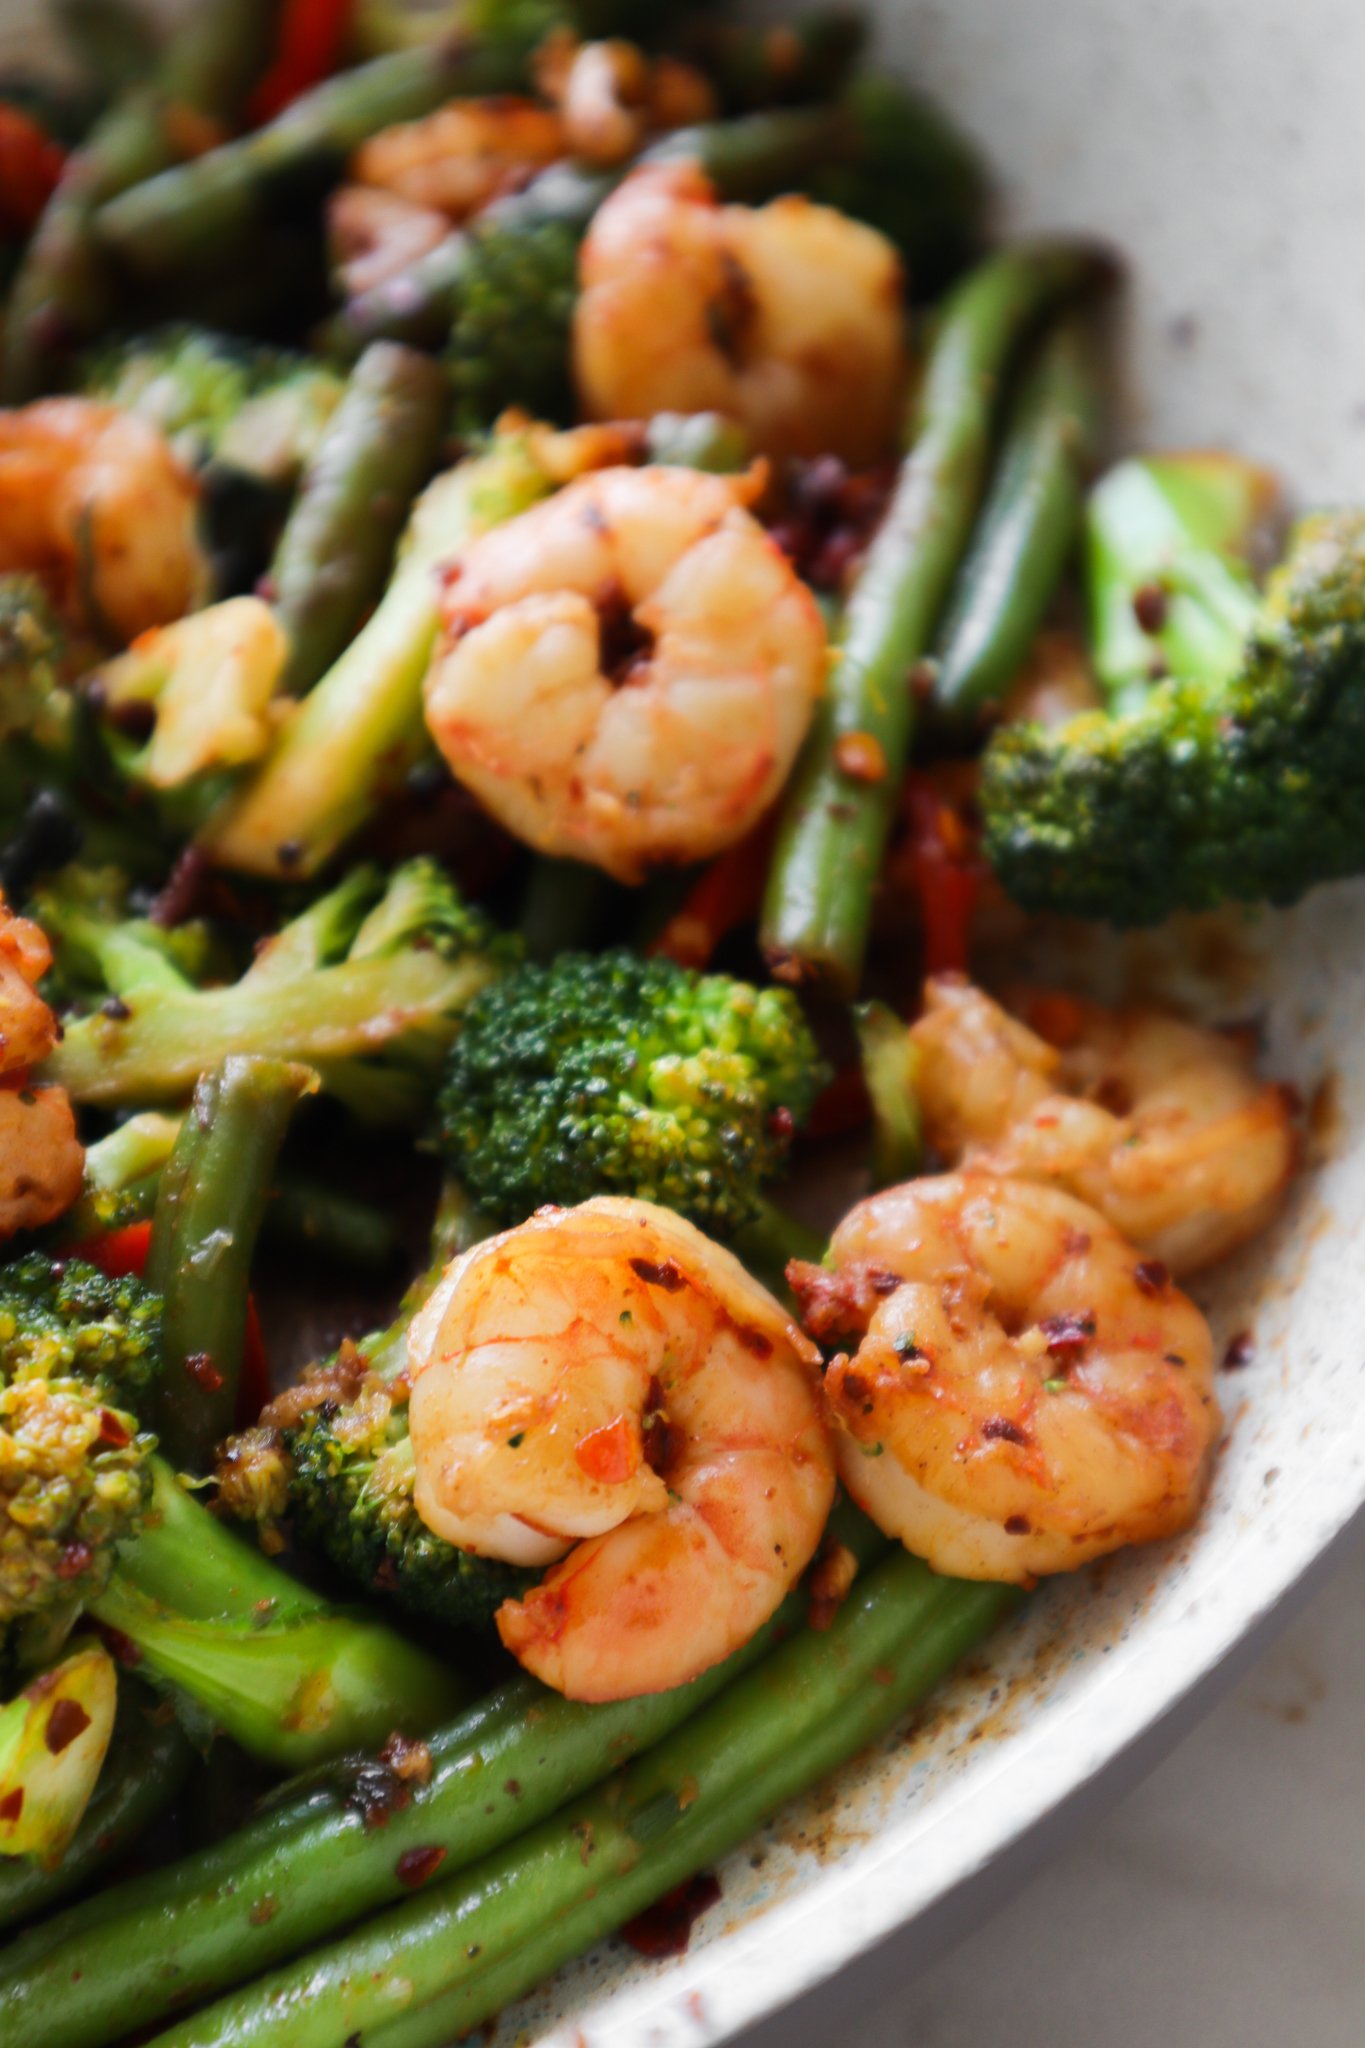 Prepare a healthy dinner in 15 minutes with this easy spicy shrimp and vegetable stir fry recipe! This simple dinner idea is gluten free, dairy free and low in carbs.